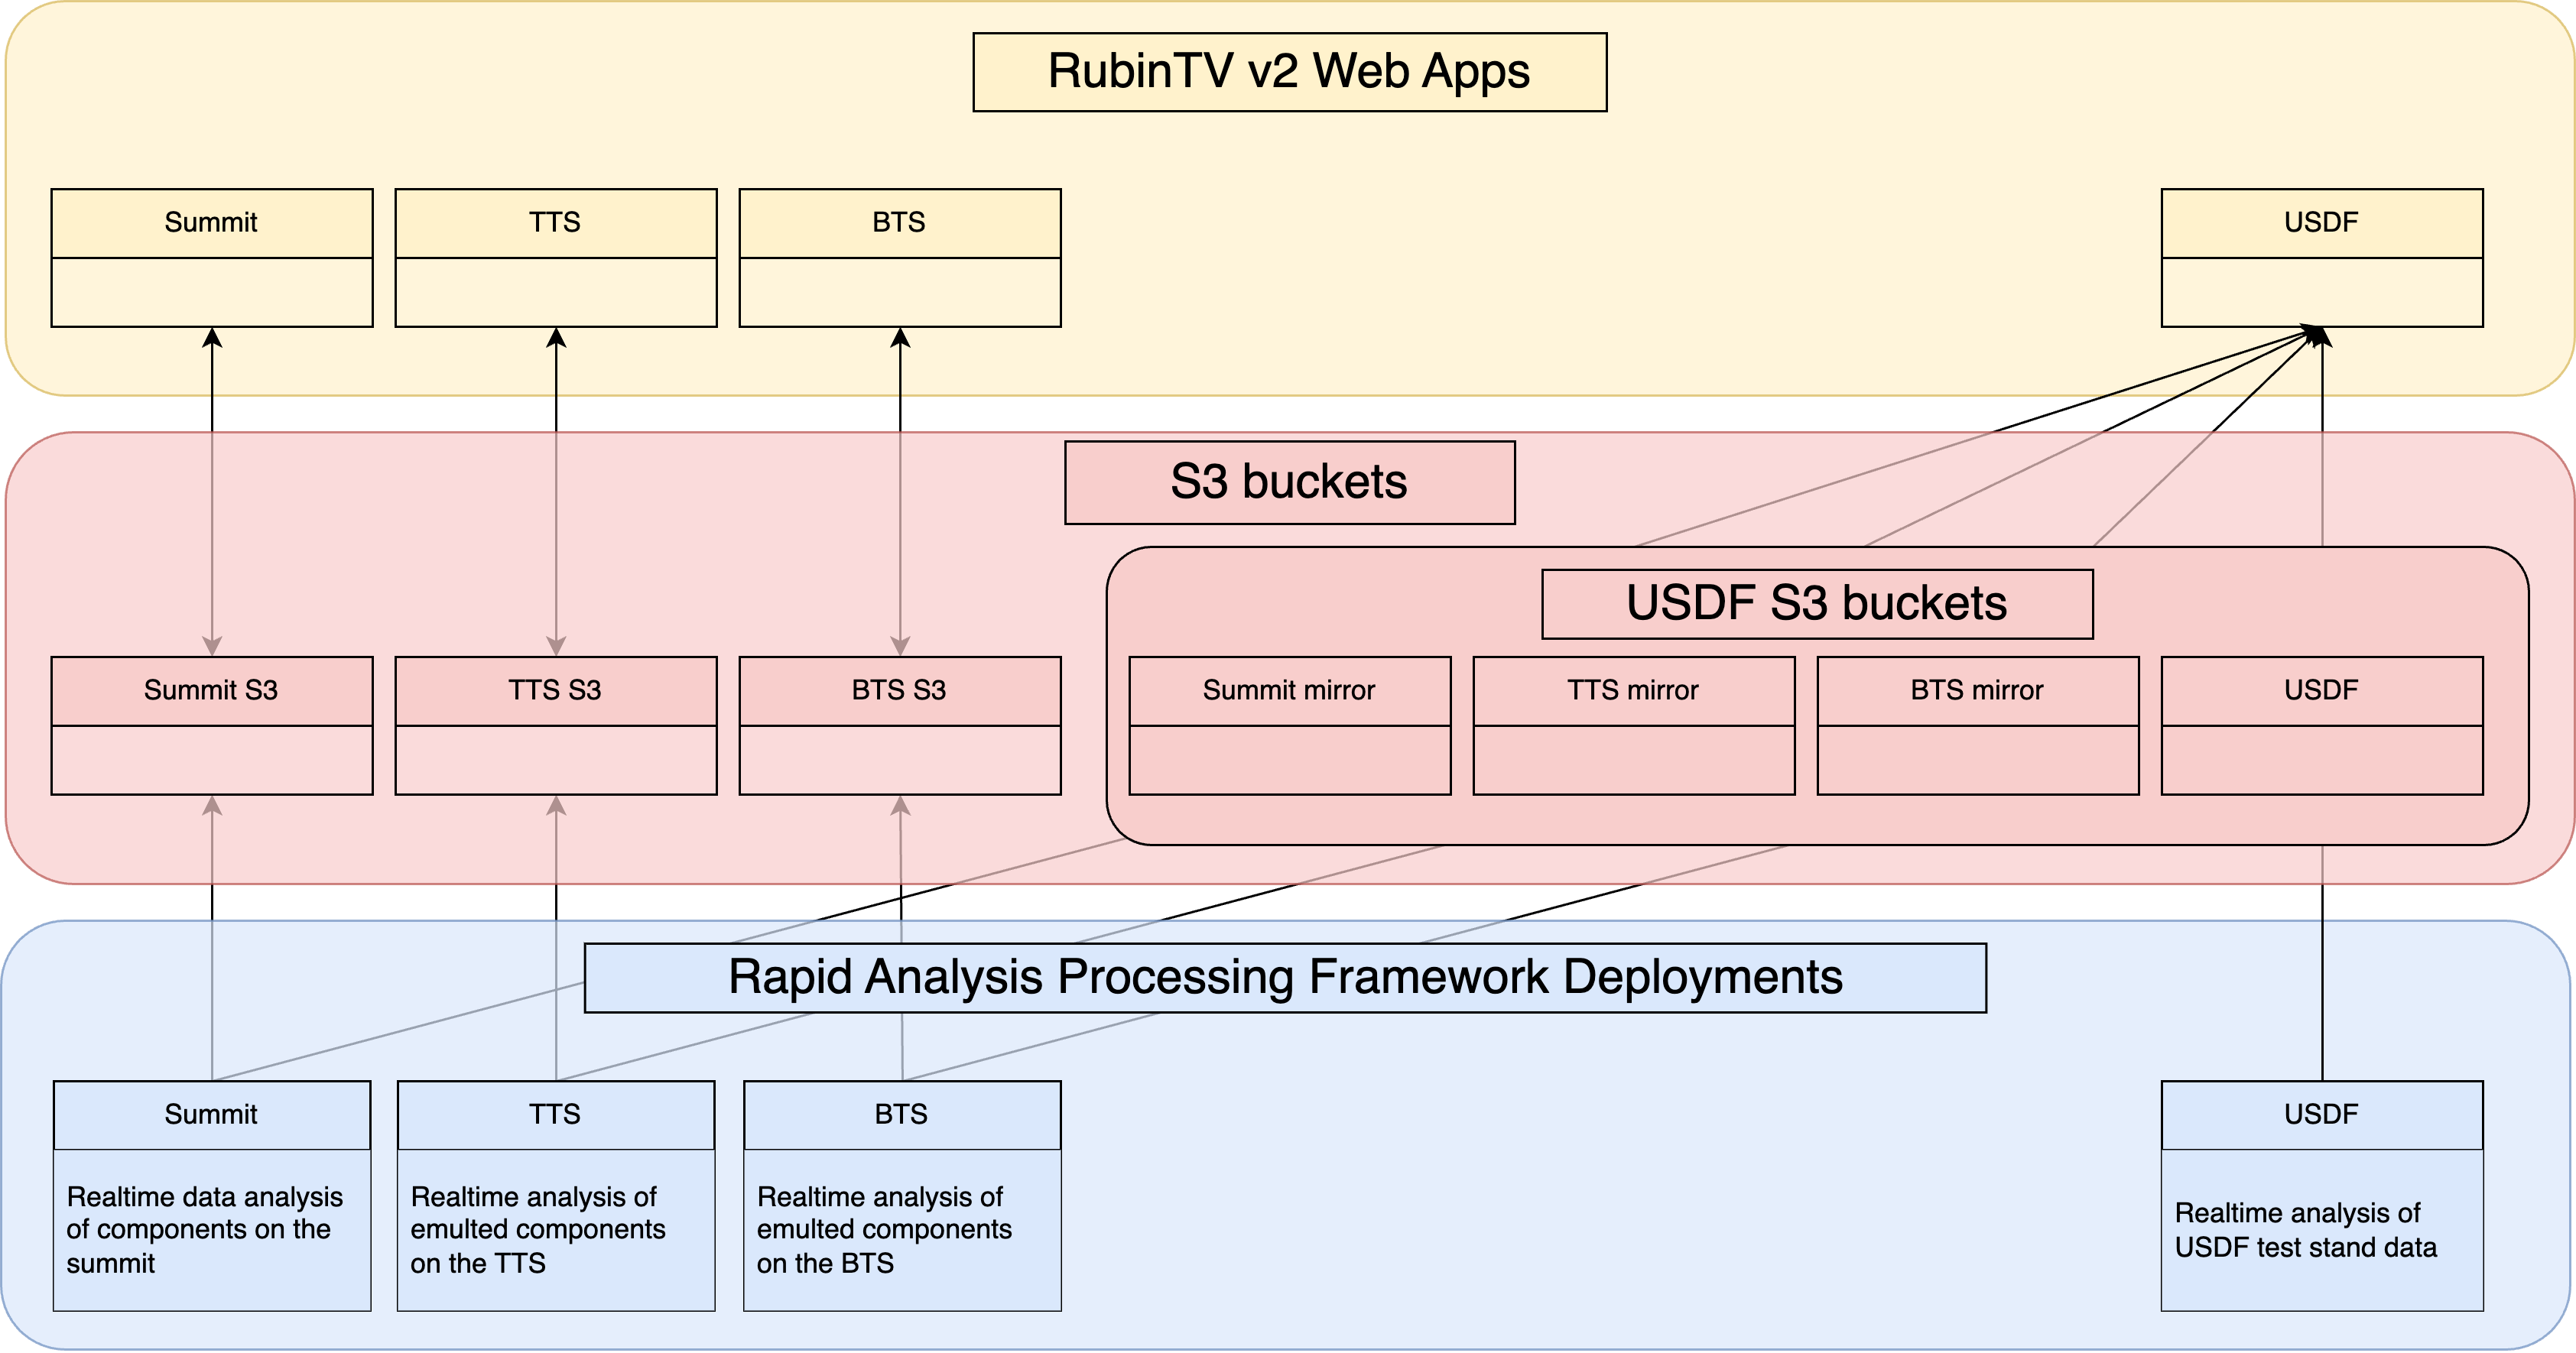 Diagram of data flow from Rapid Analysis to the various S3 and RubinTV instances